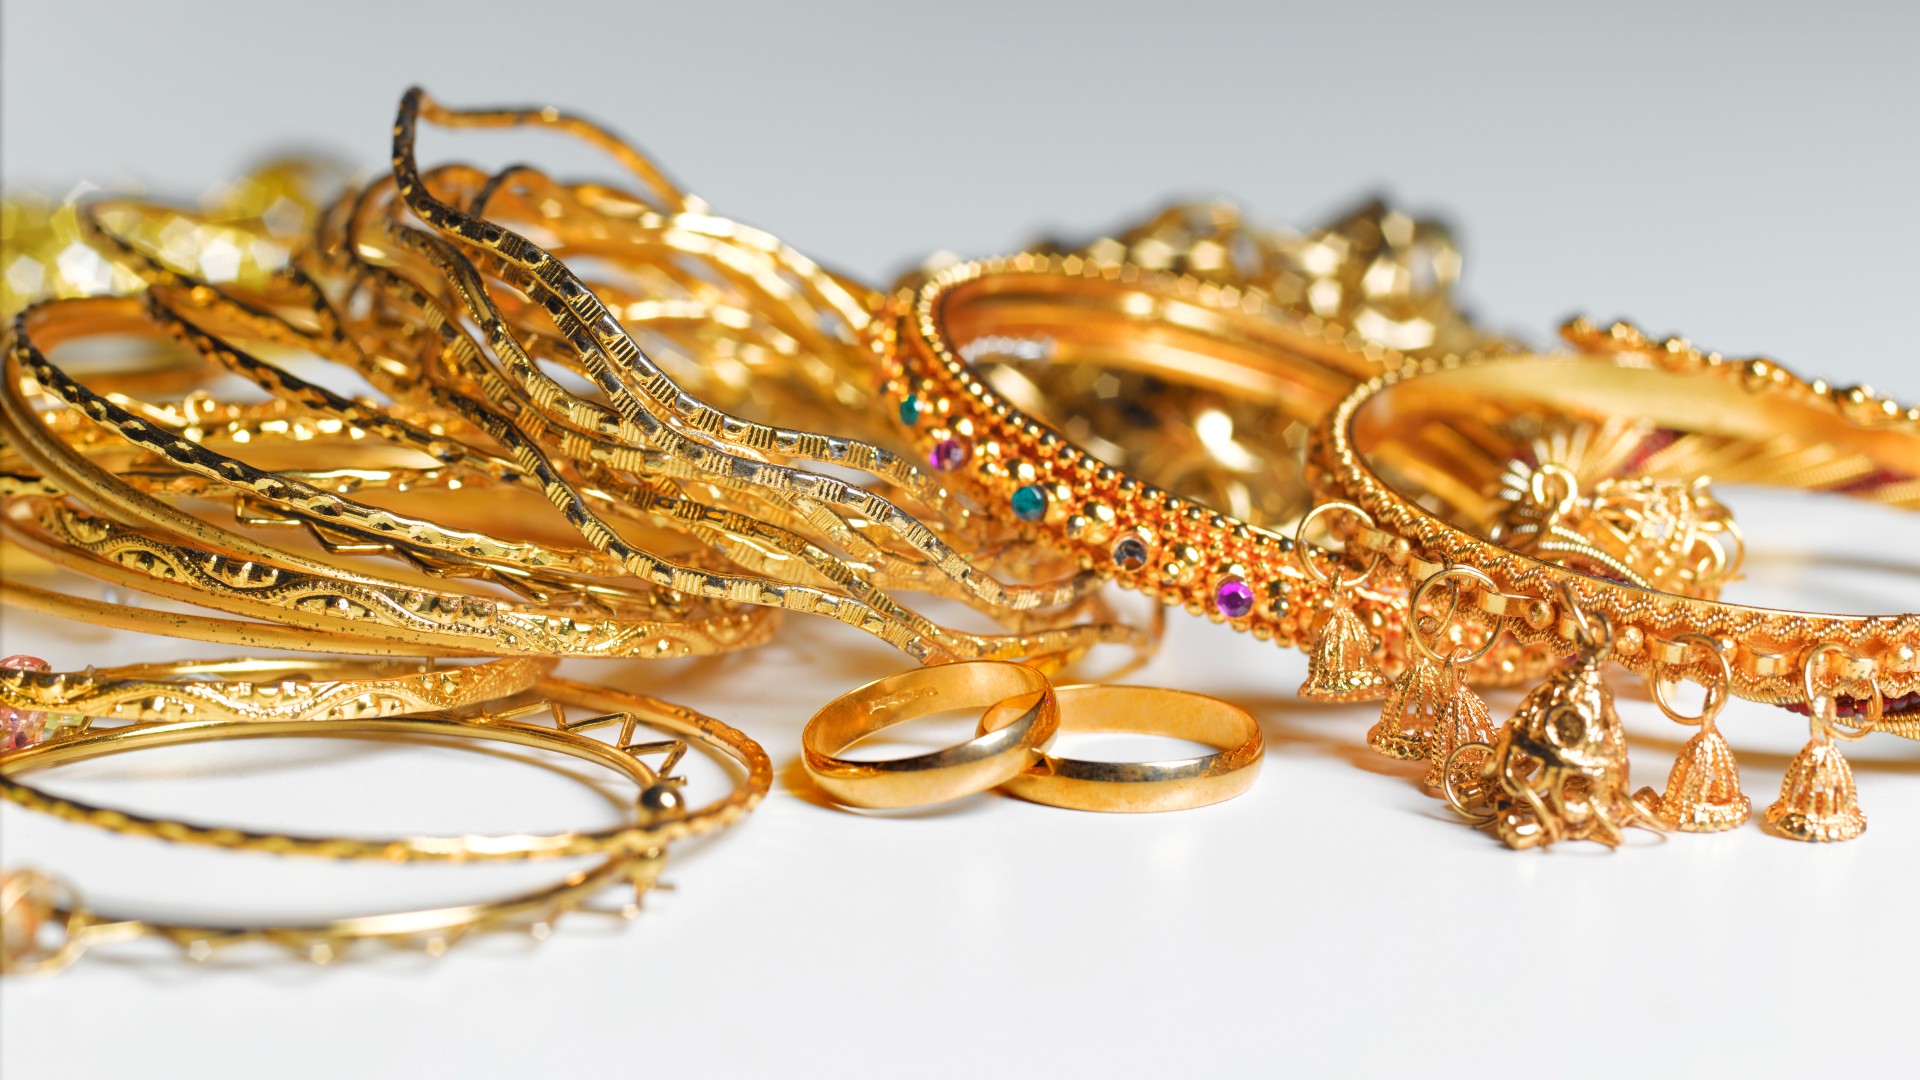 Gold jewelry. Image by Peter Dazeley via Getty Images